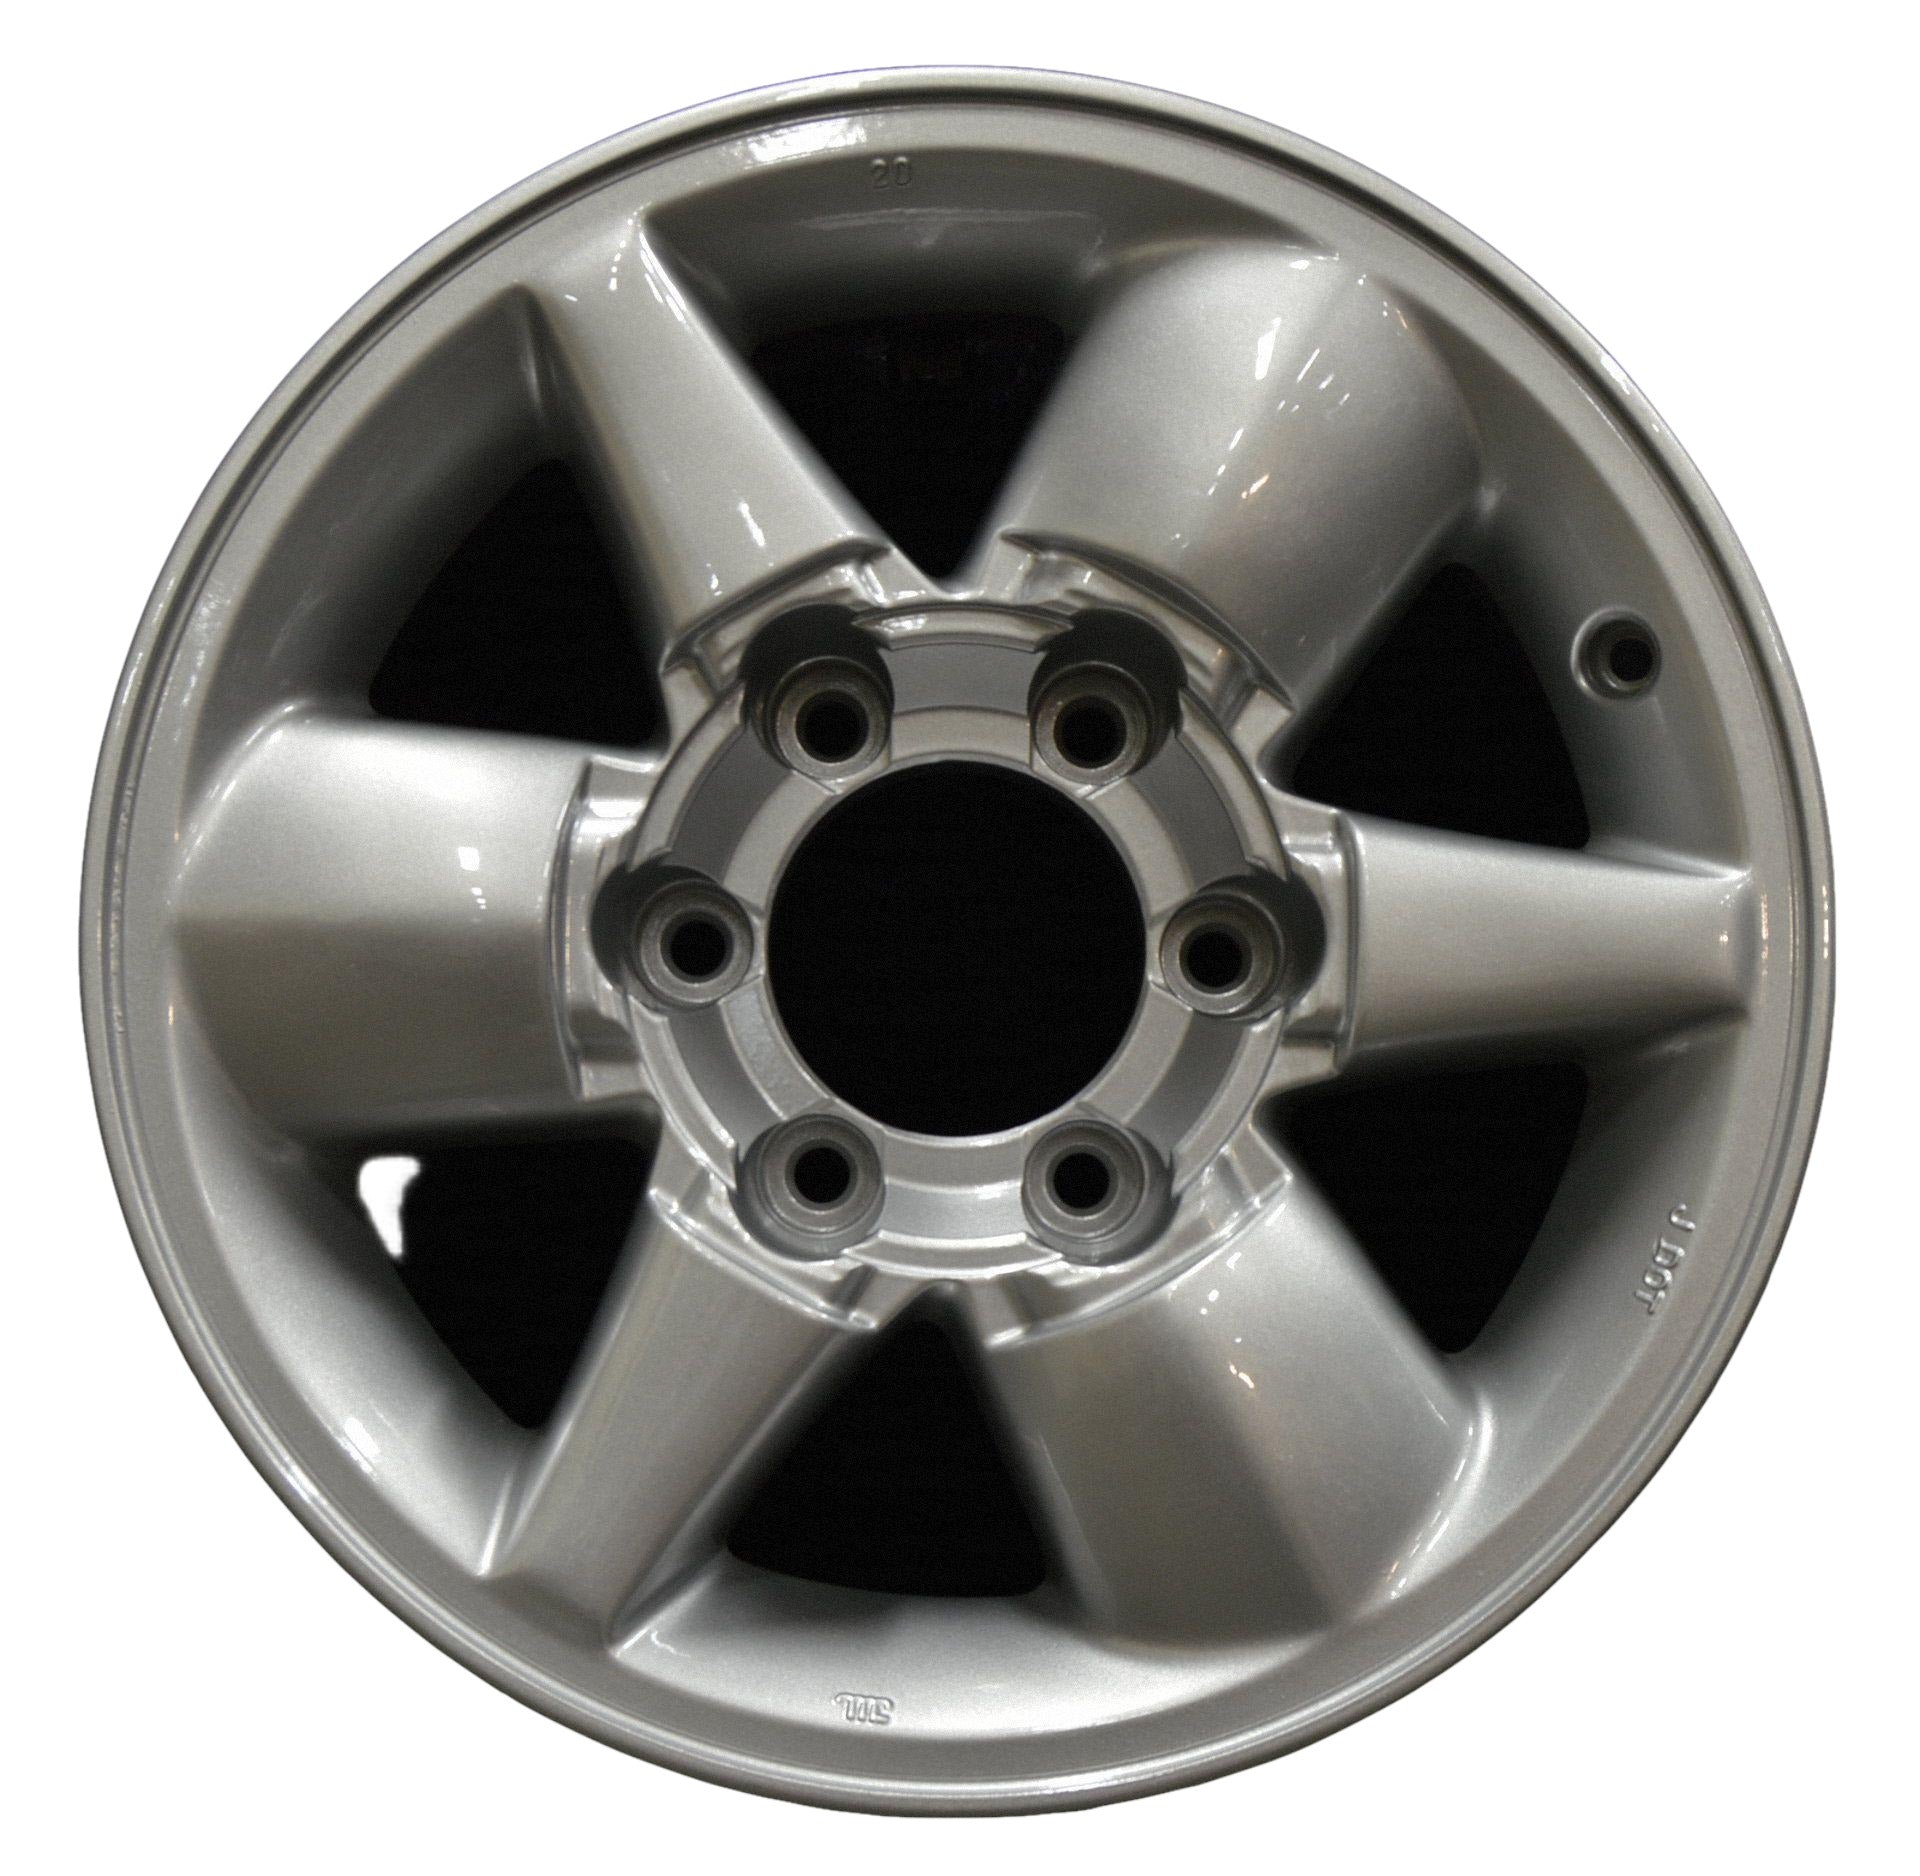 Nissan Pathfinder  1999, 2000, 2001, 2002 Factory OEM Car Wheel Size 16x7 Alloy WAO.62372.PS01.FF